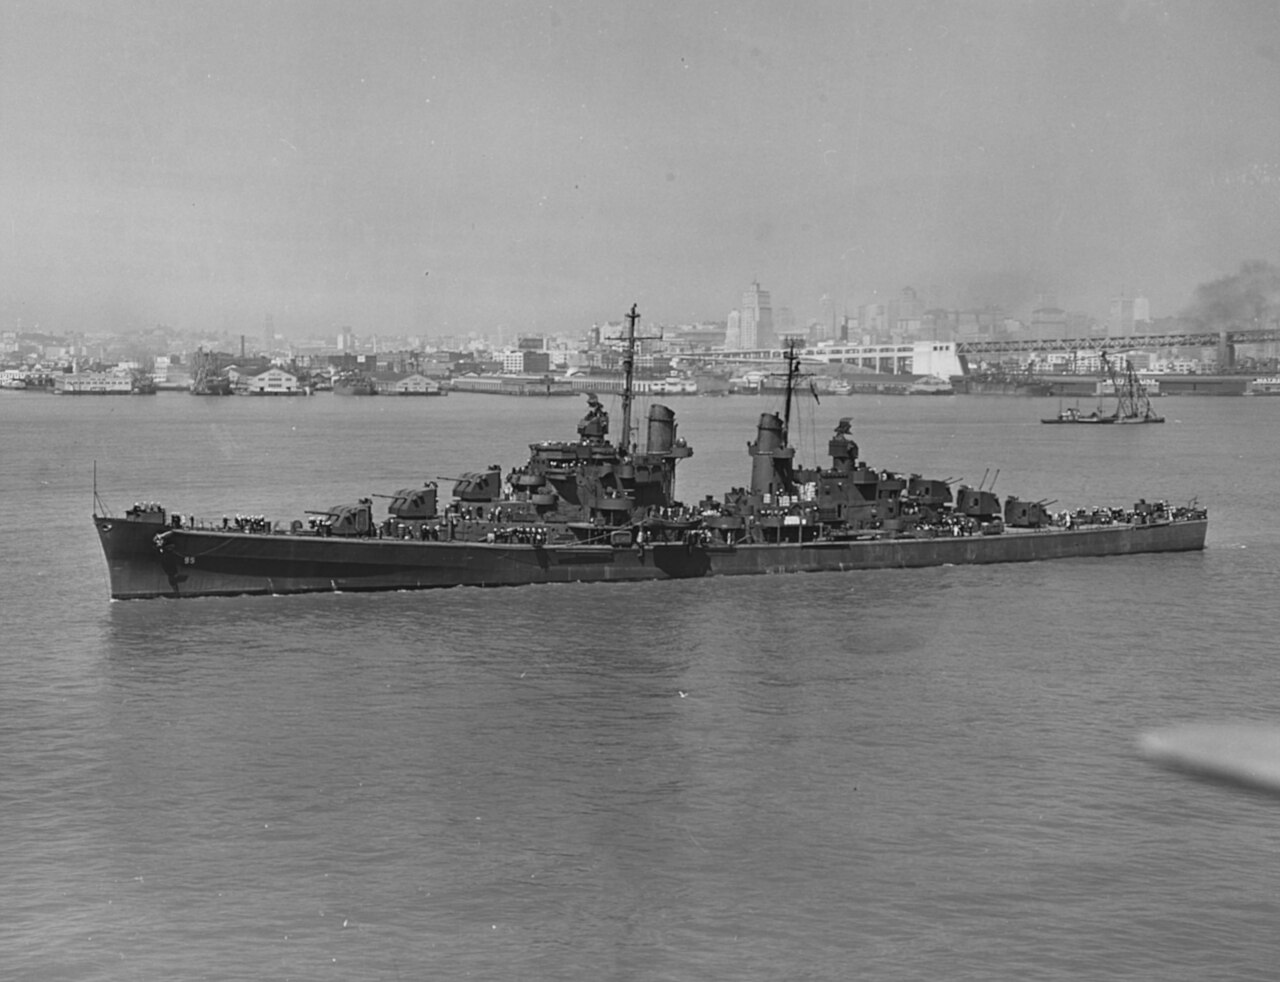 1280px-USS_Oakland_(CL-95)_in_San_Francisco_Bay_on_2_August_1943_(NH_98442).jpg